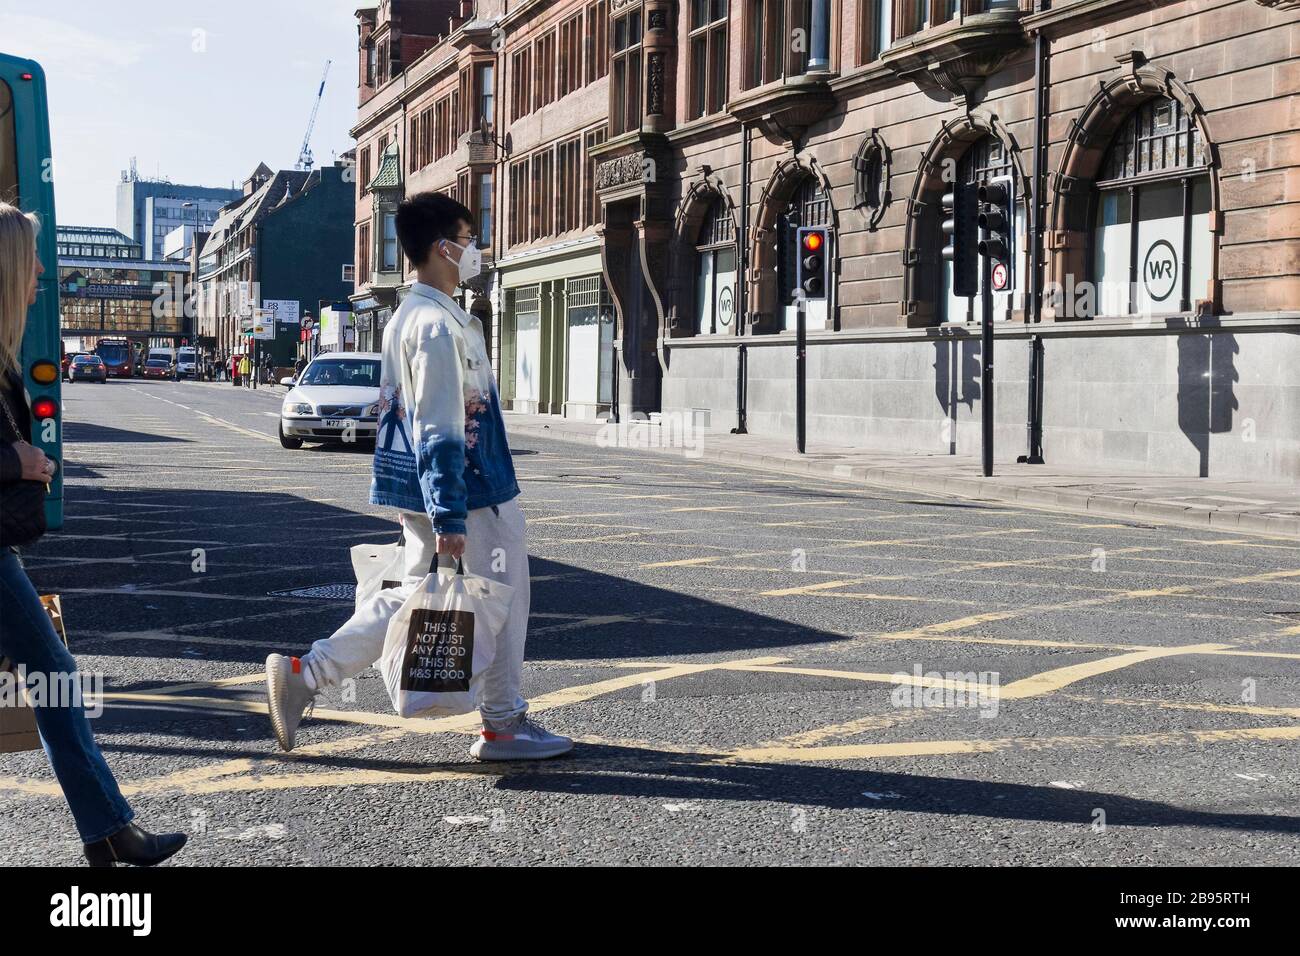 An Asian man crosses a Haymarket road in Newcastle upon Tyne, UK, wearing a facemask as protection against covid-19, coronavirus puring the pandemic o Stock Photo